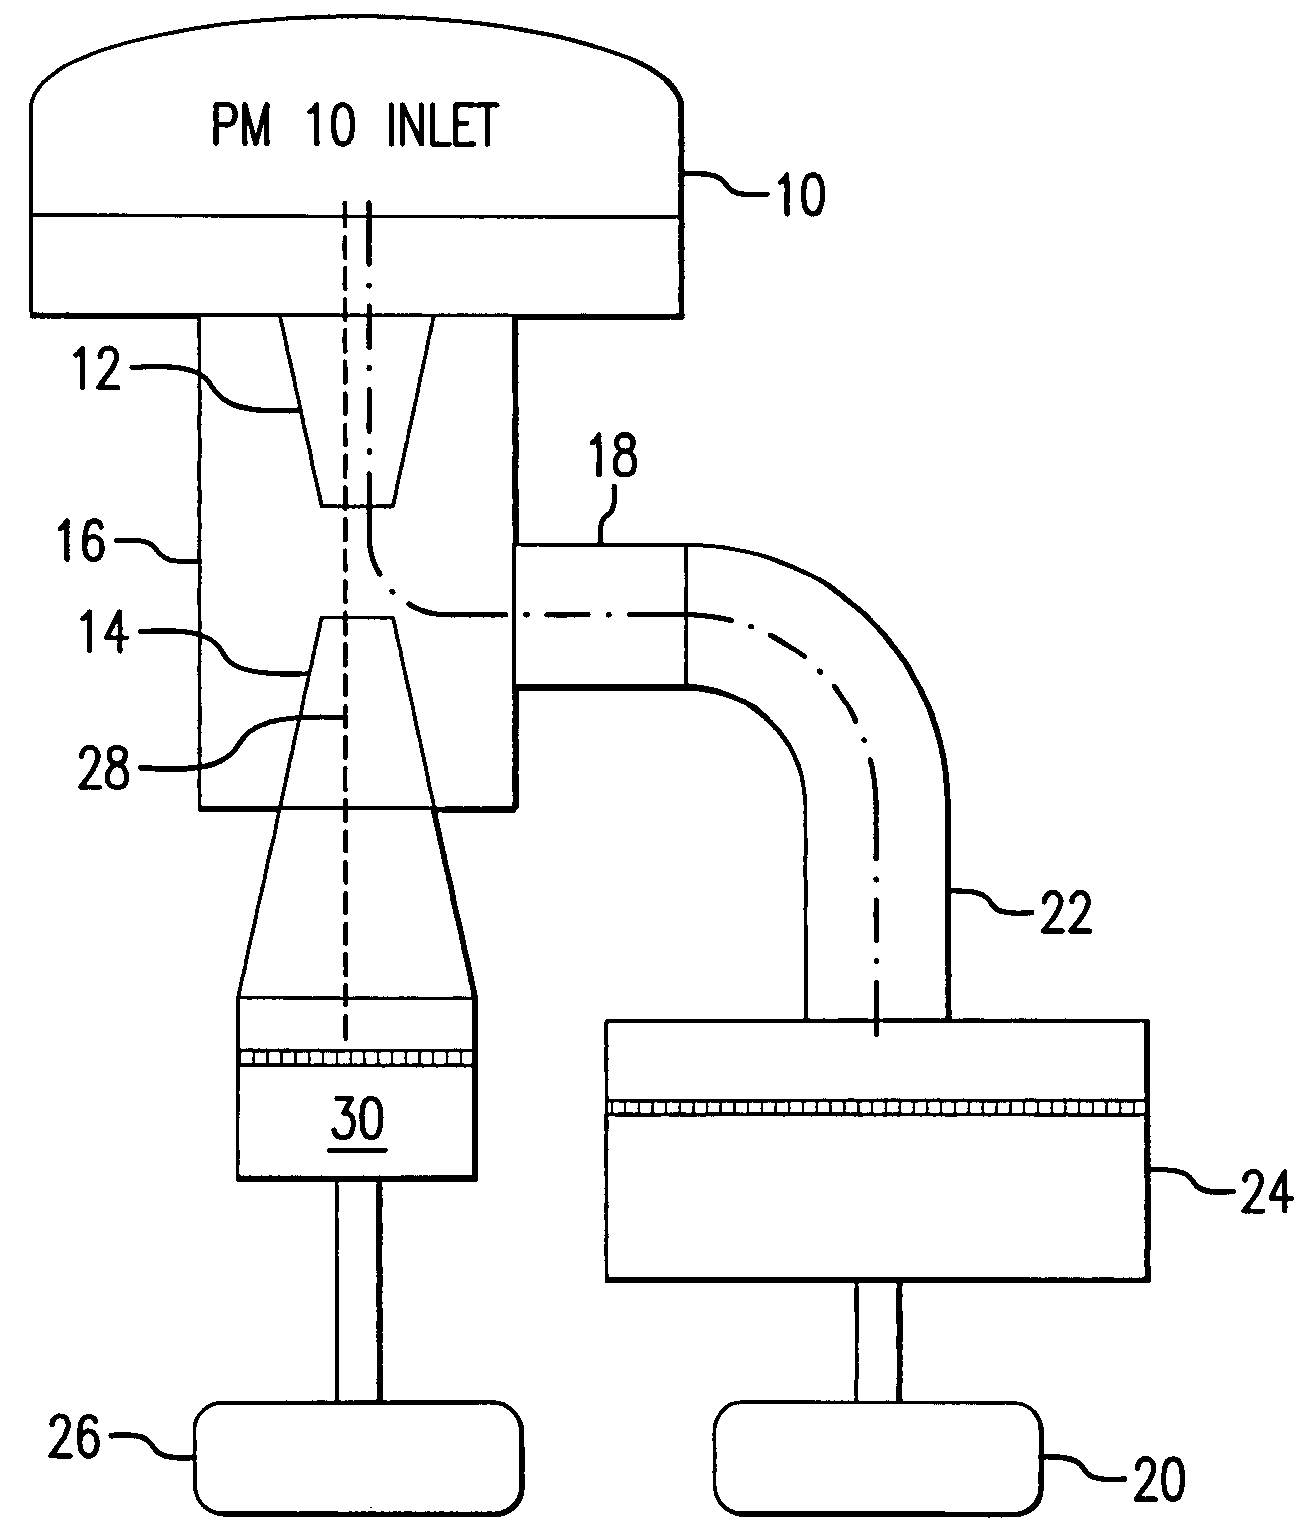 Particle matter sampling method and sampler with a virtual impactor particle concentrator